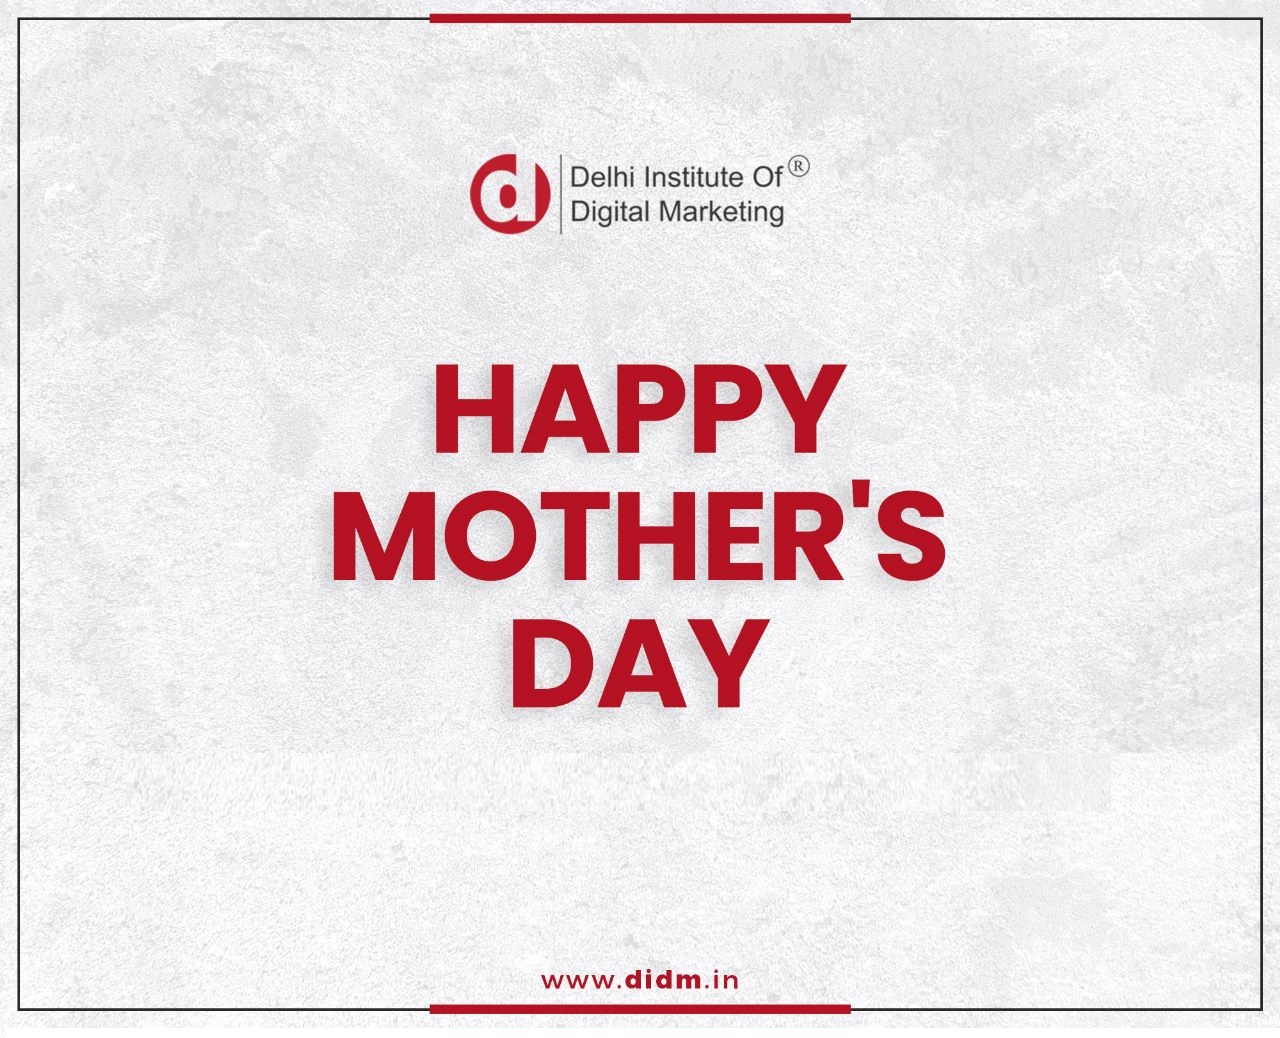 Happy Mother’s Day To All Of You